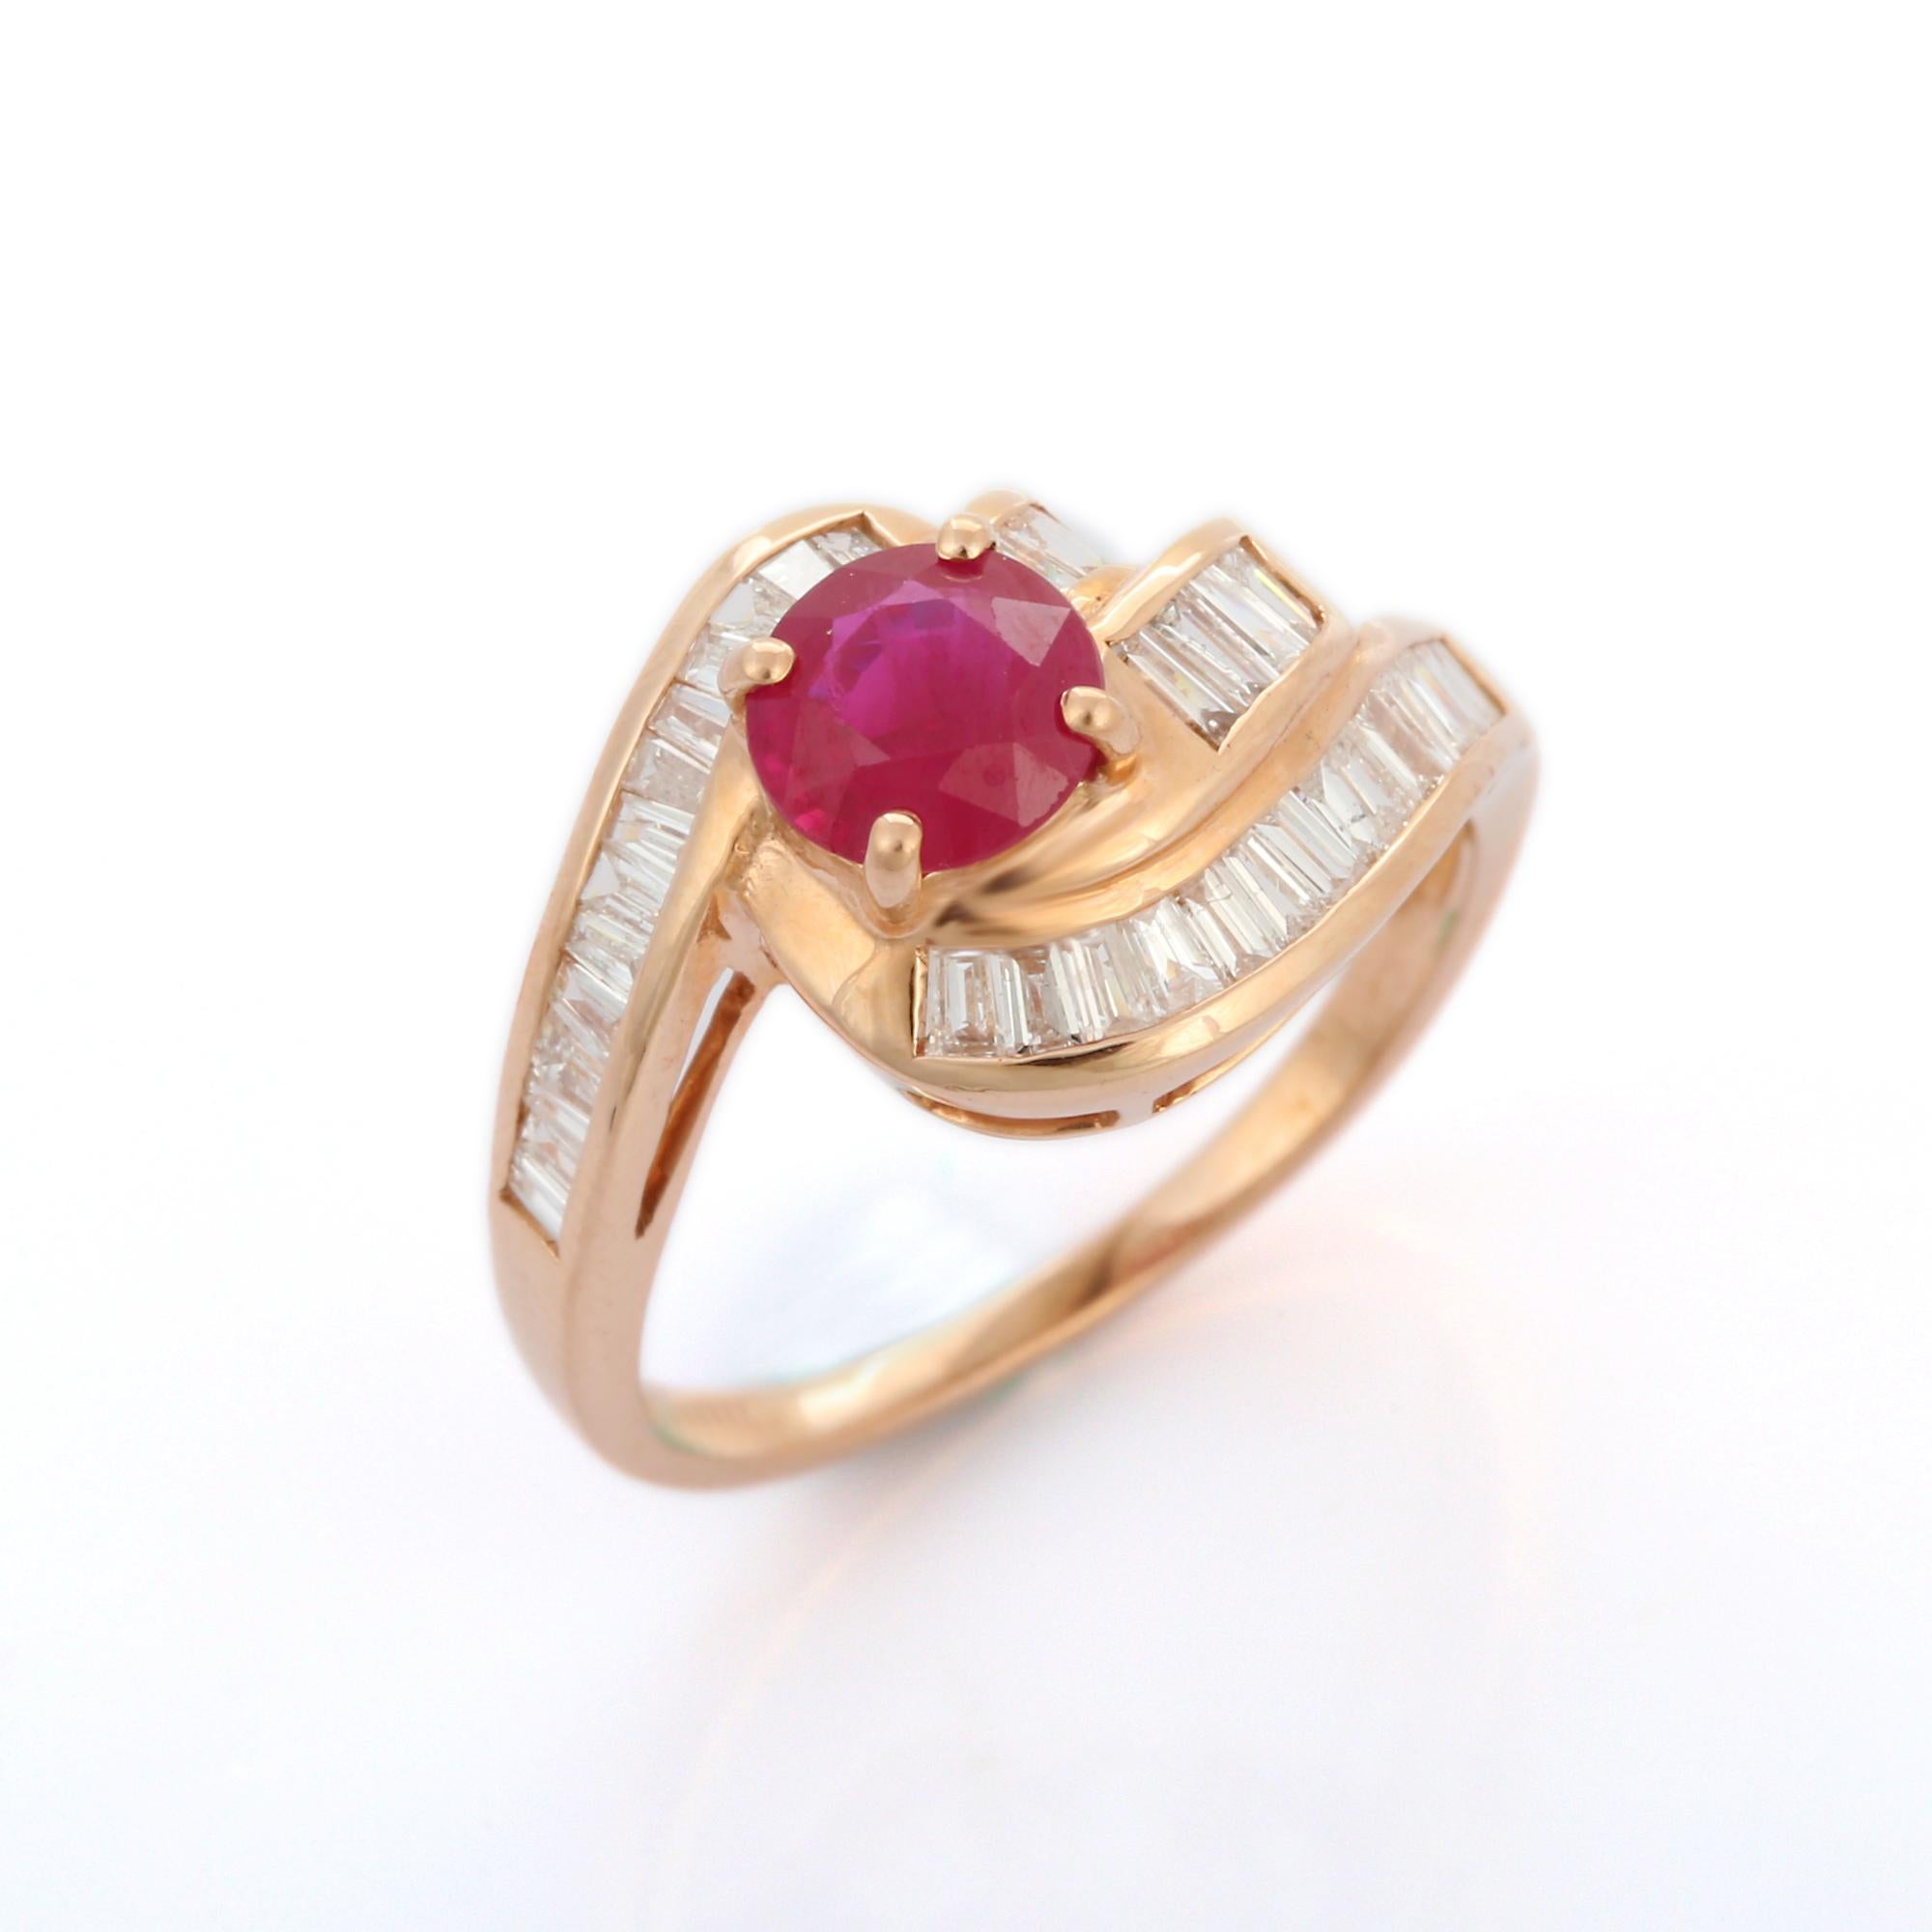 For Sale:  14K Rose Gold Baguette Cut Diamond and Ruby Ring 5